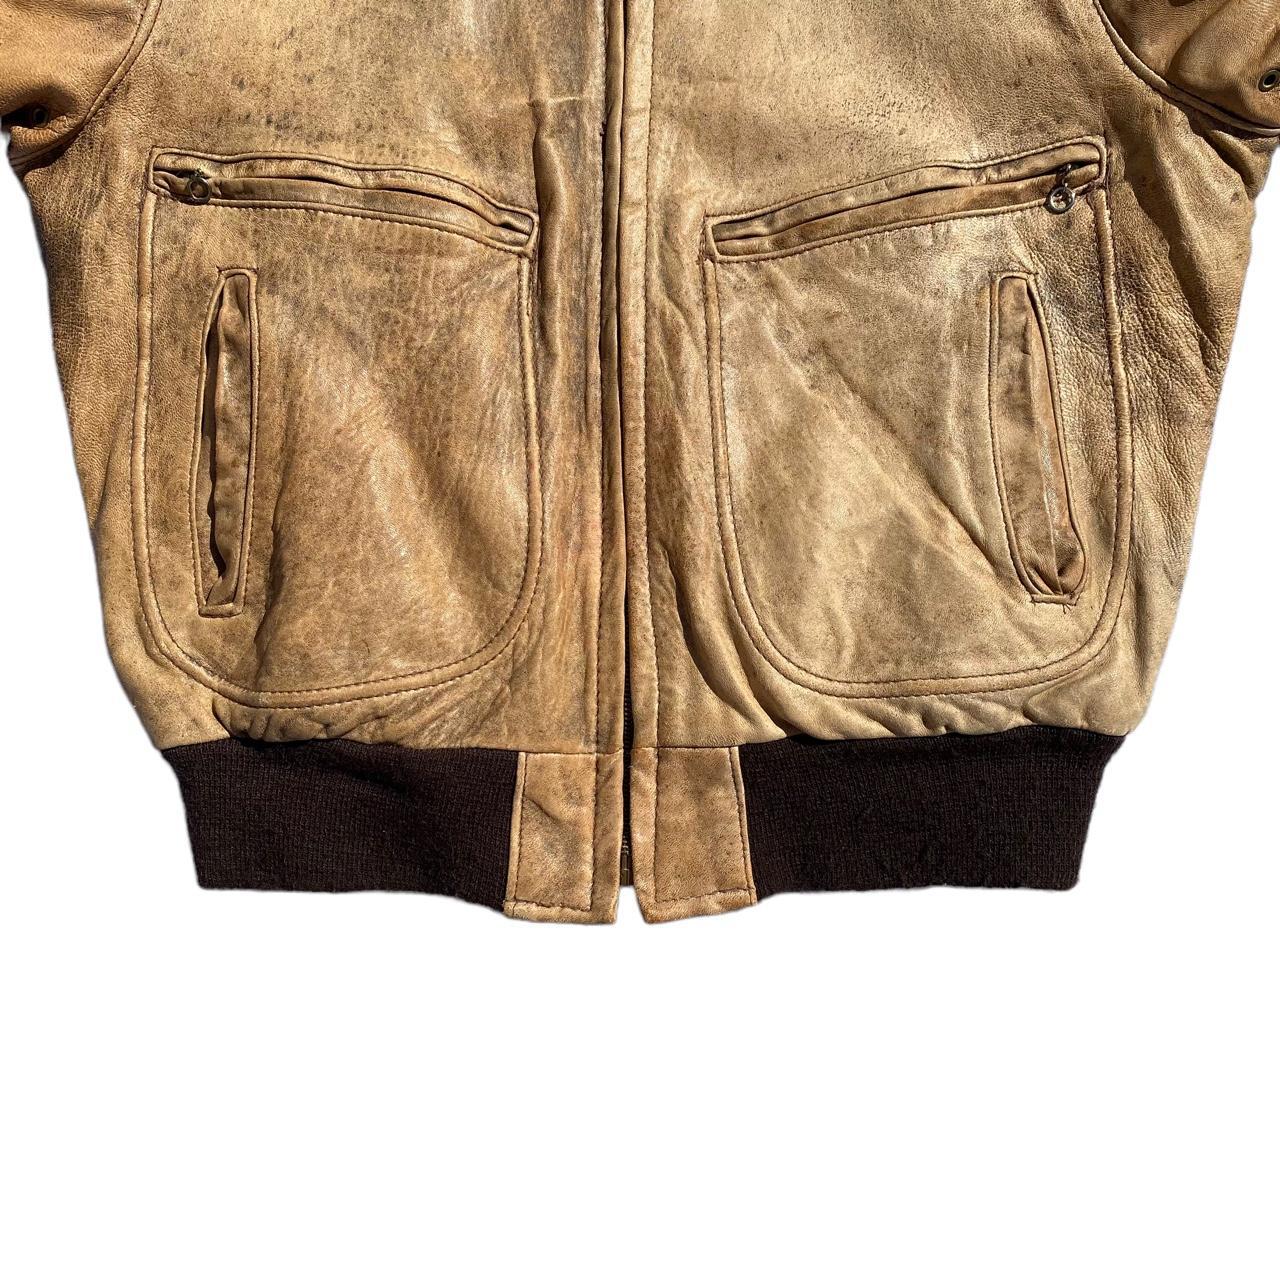 Product Image 2 - Vintage Distressed Schott Perfecto Tan